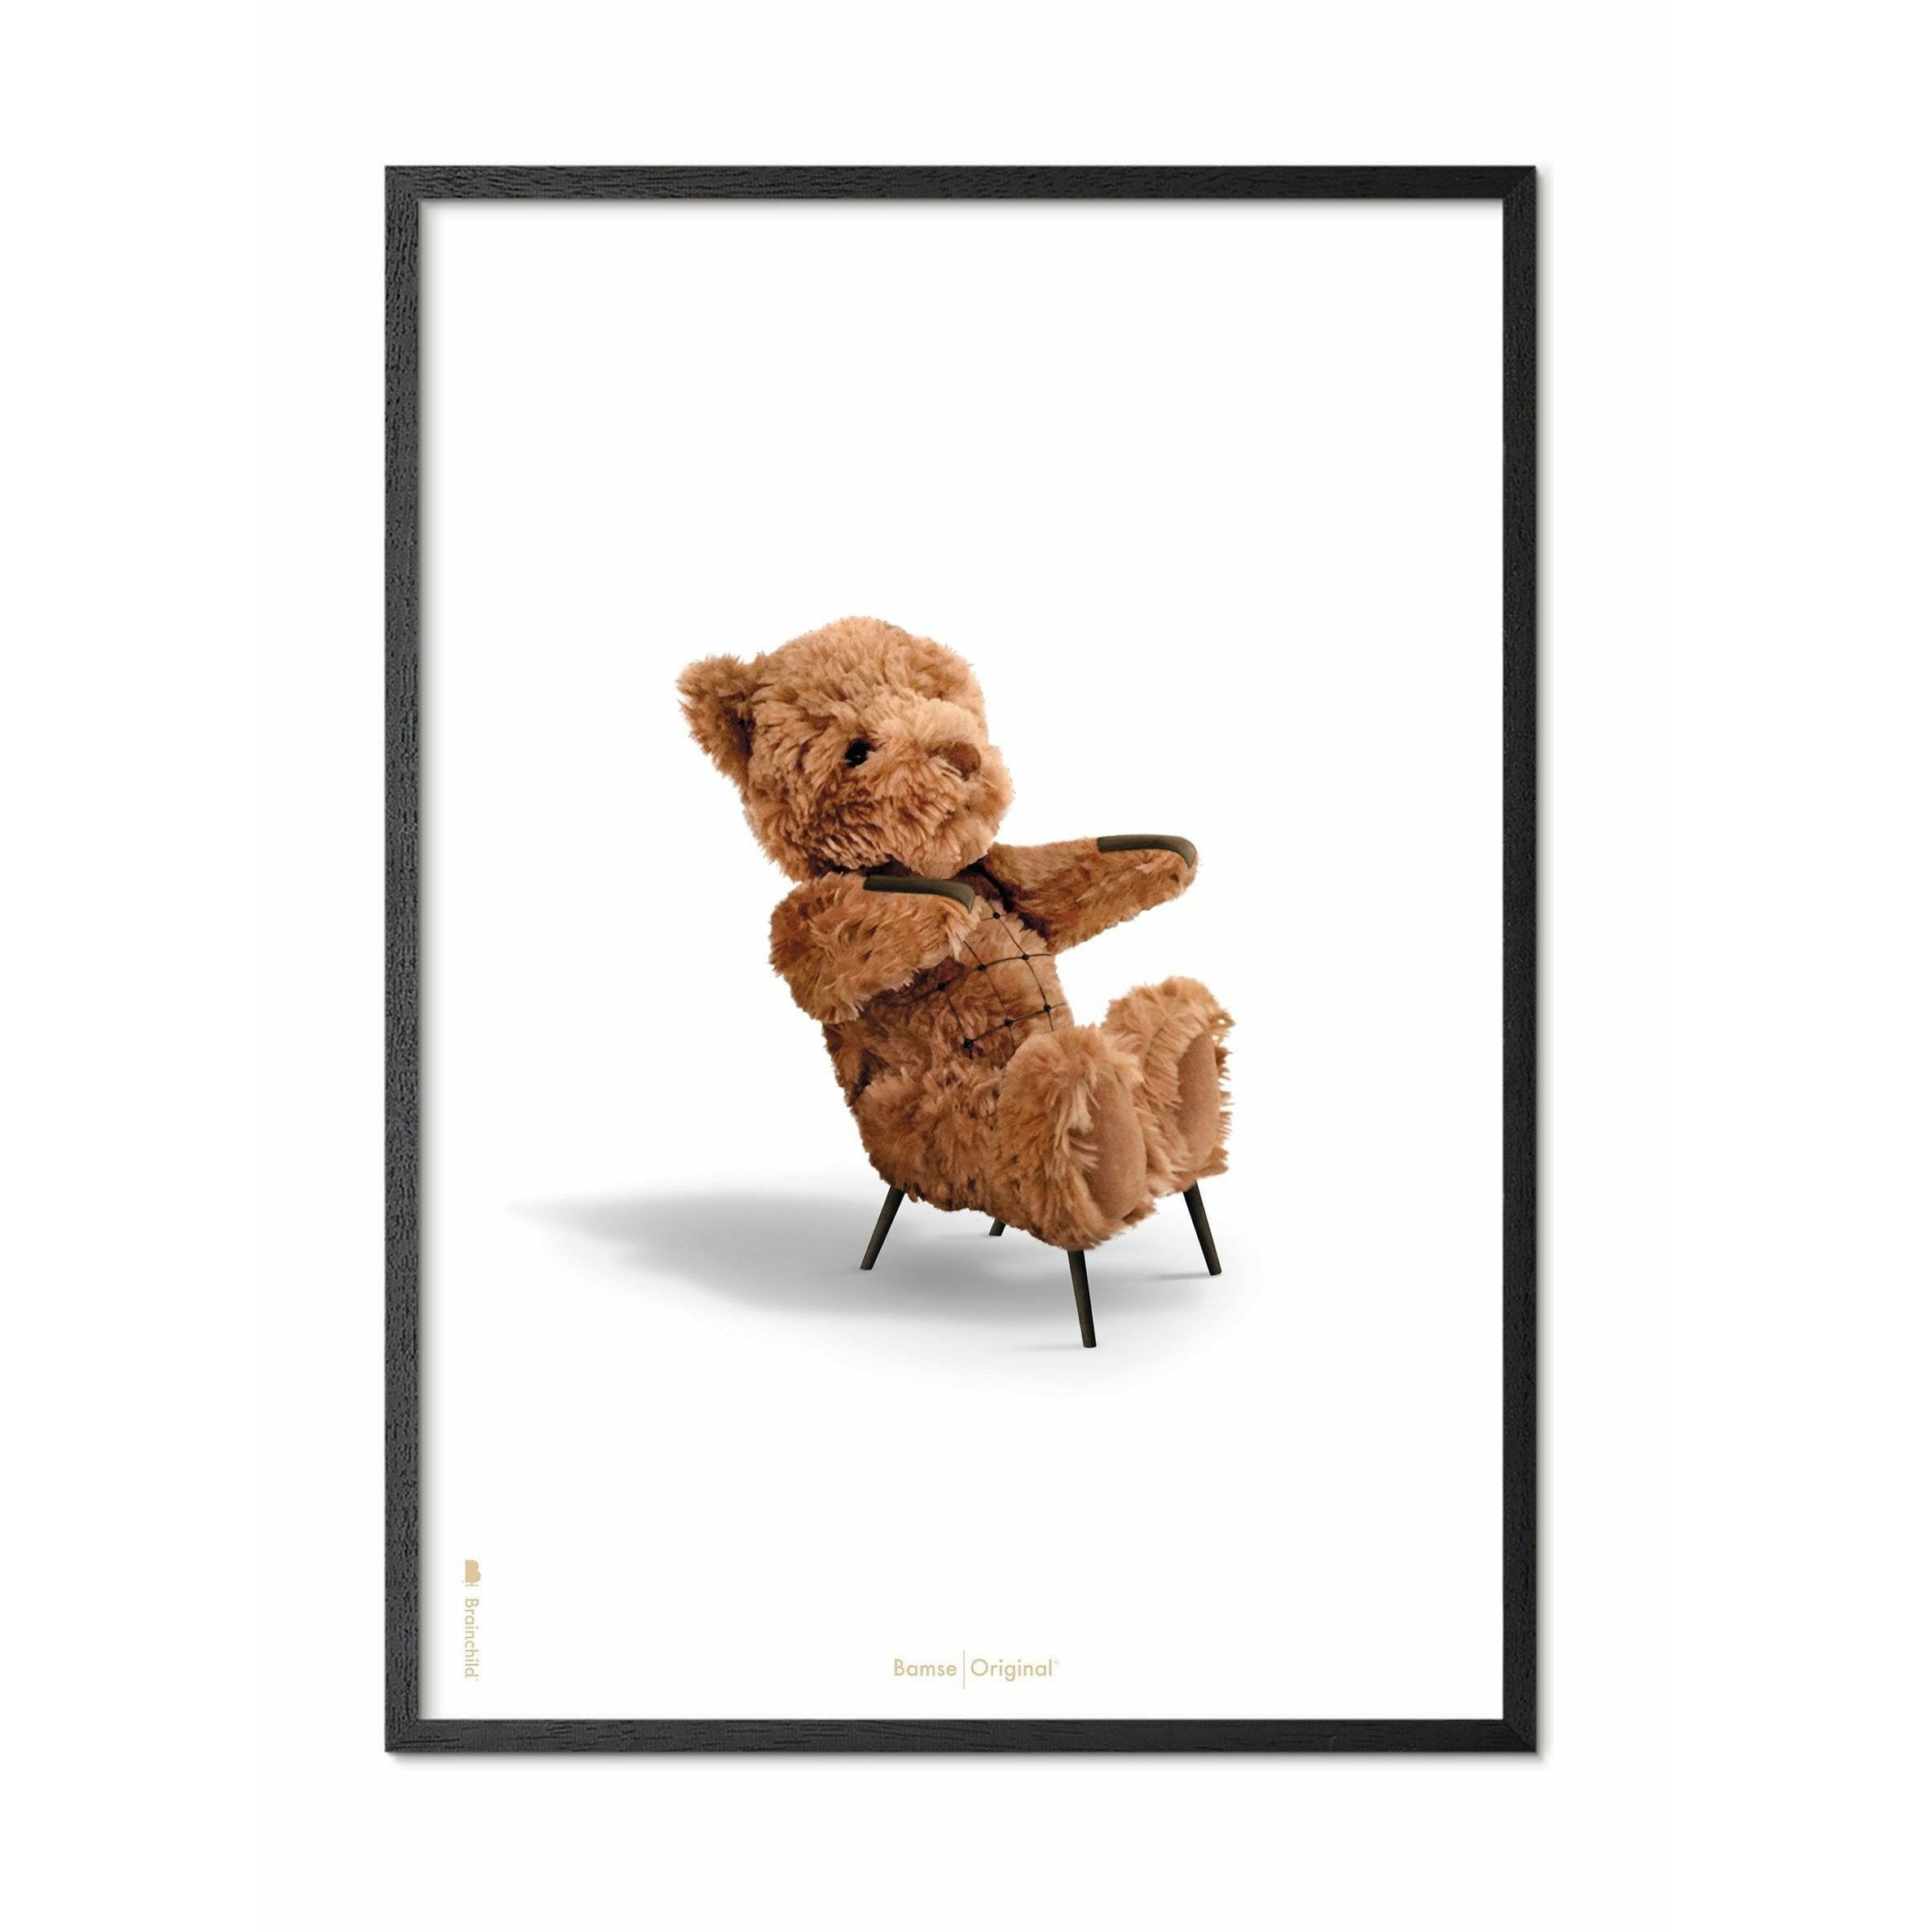 Brainchild Teddy Bear Classic Poster, Frame In Black Lacquered Wood 30x40 Cm, White Background